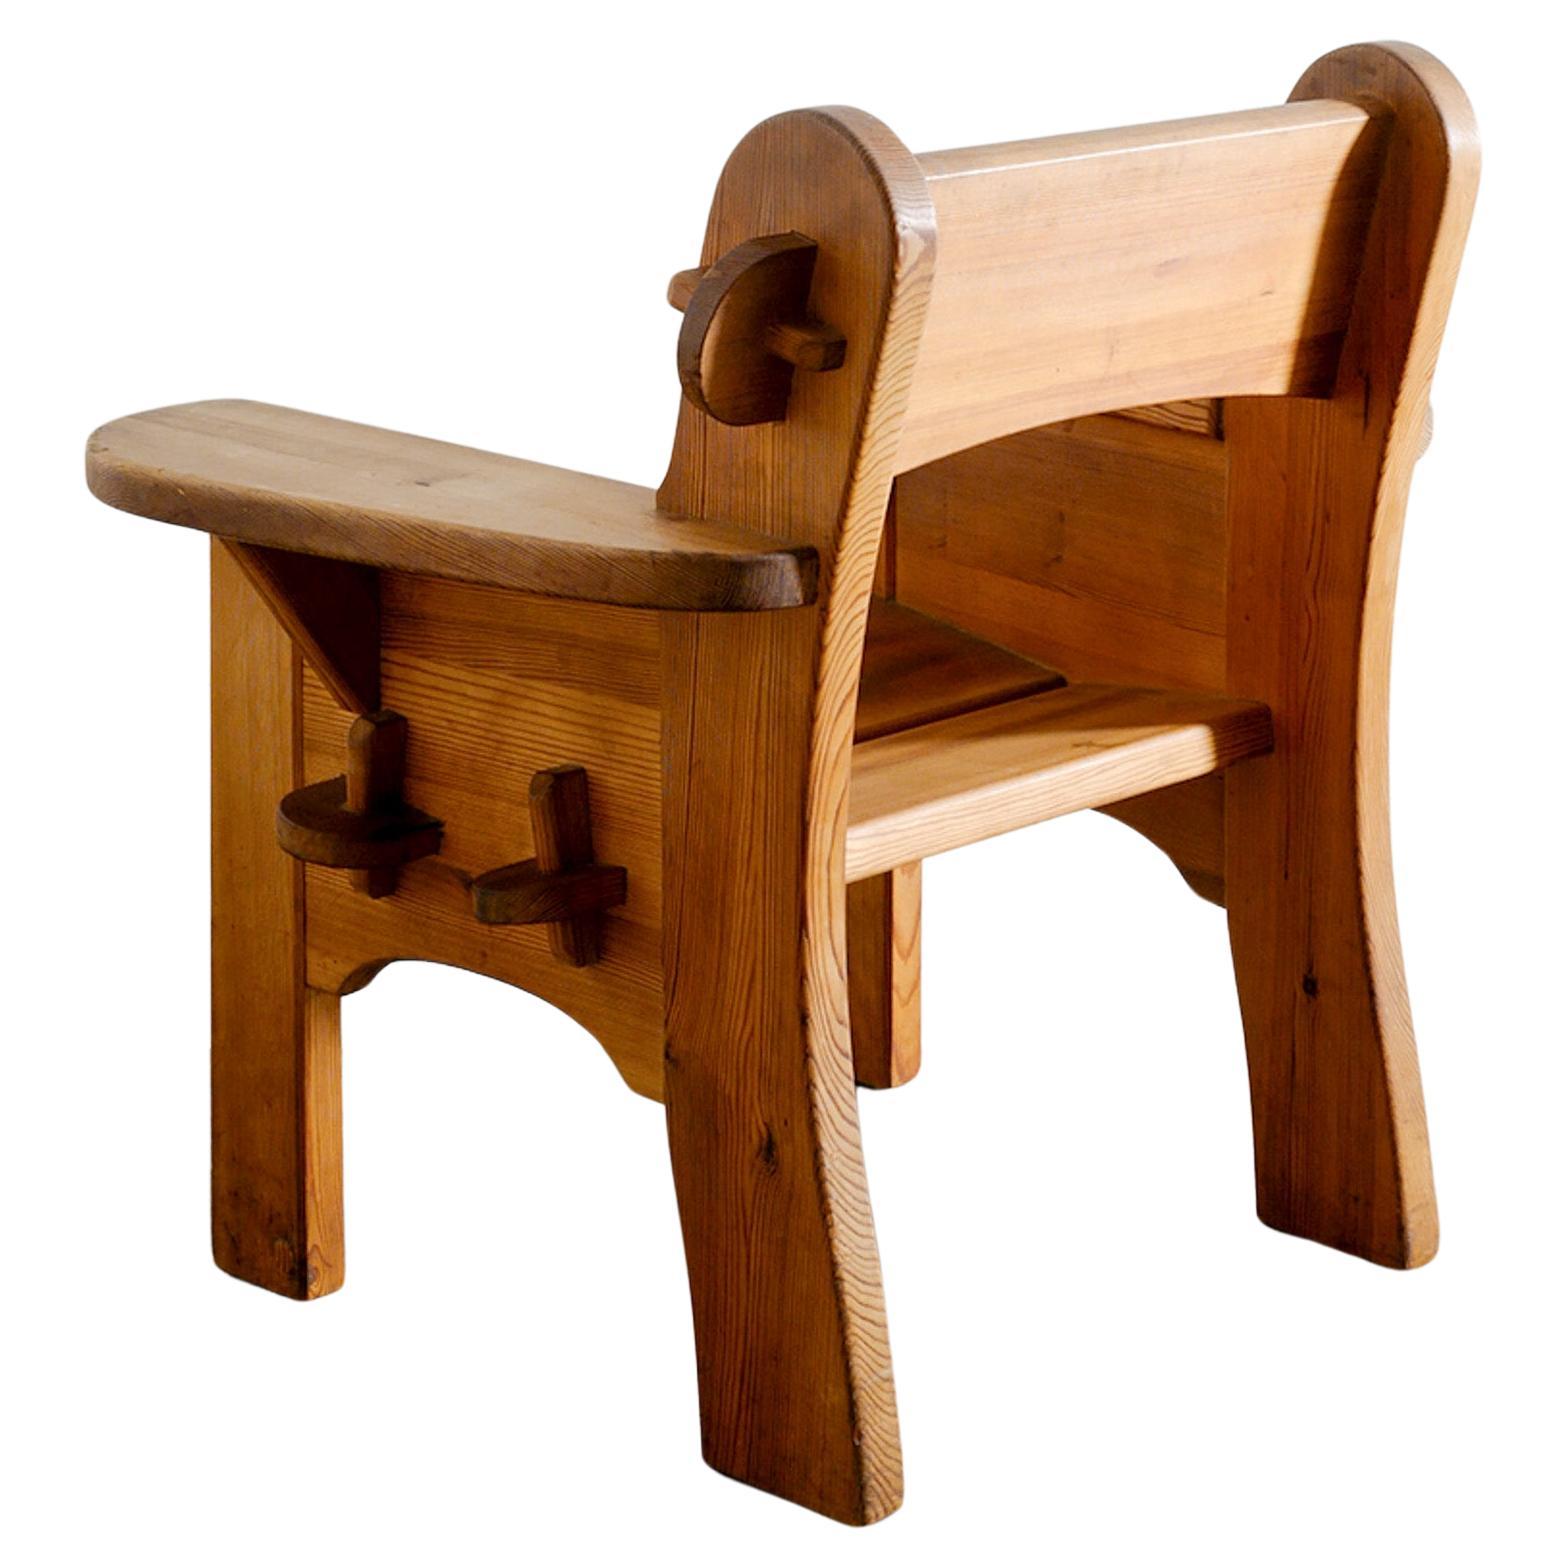 David Rosén "Berga" Armchair in Solid Stained Pine by Nordiska Kompaniet, 1940s For Sale